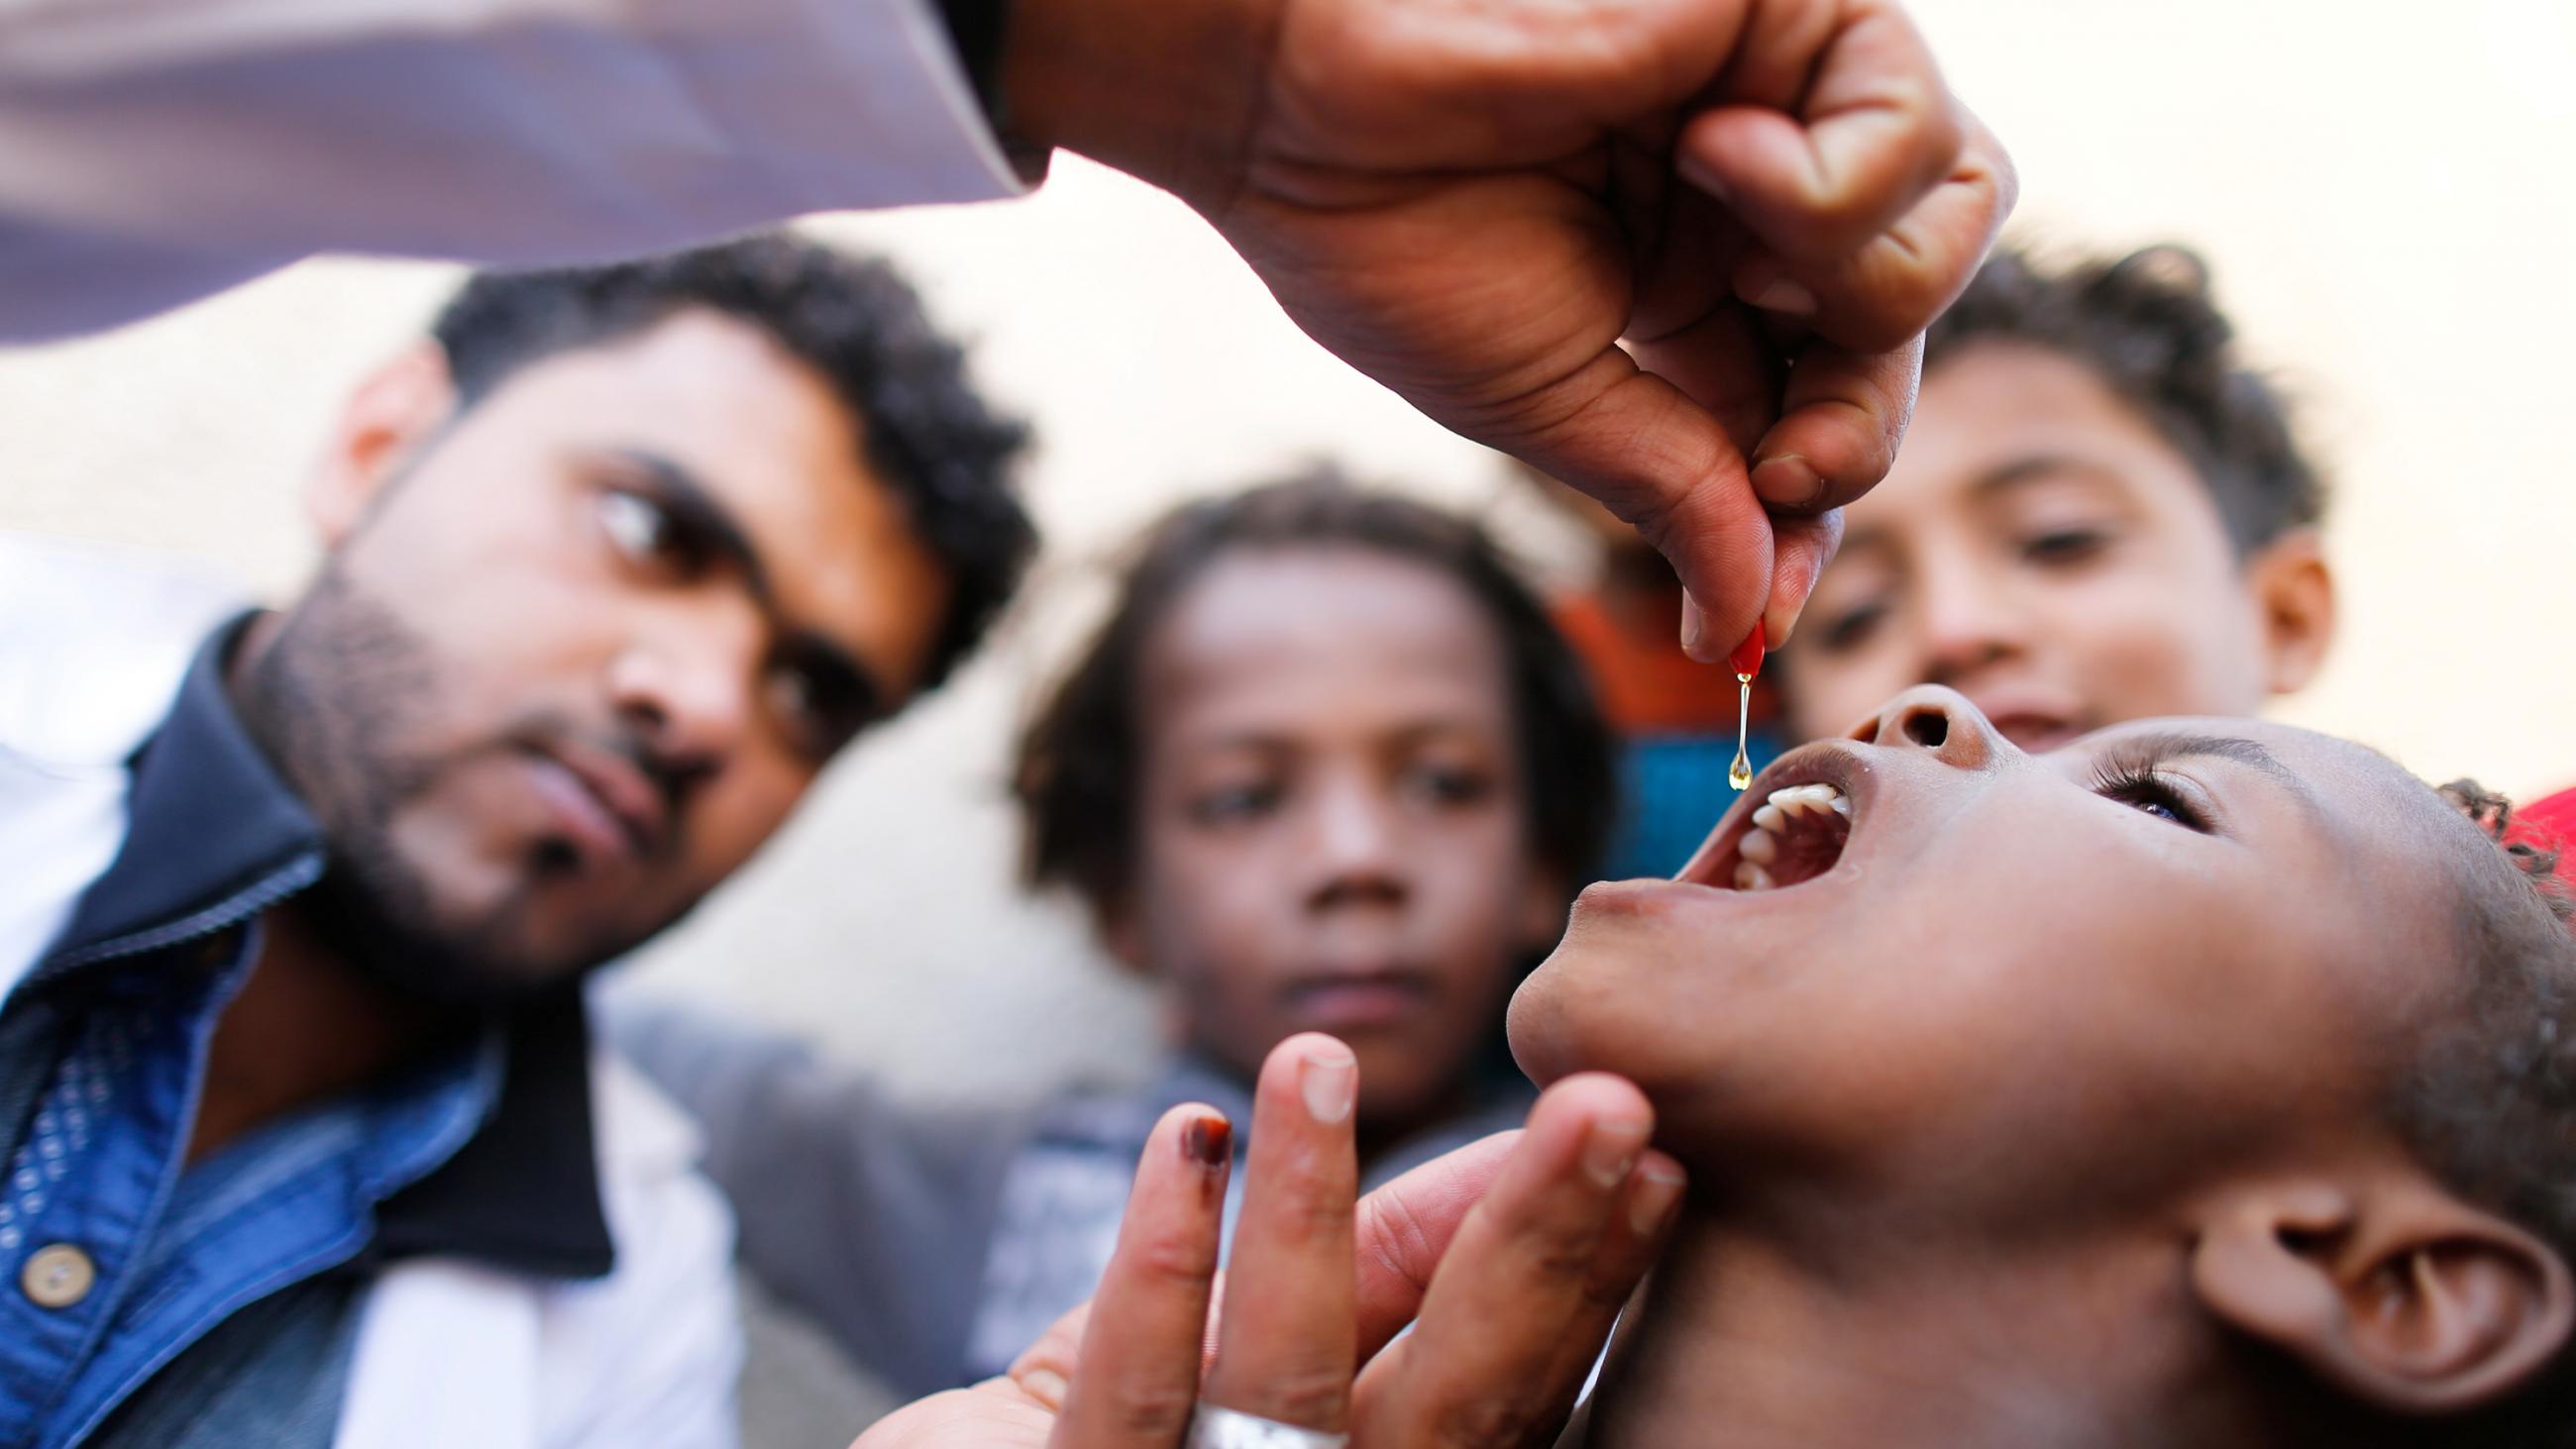 The image shows a health worker holding a dropper above a child's head. He is concentrating on the dropper, from which he is squeezing a clear liquid into the child's open mouth with family members looking on in the background. 